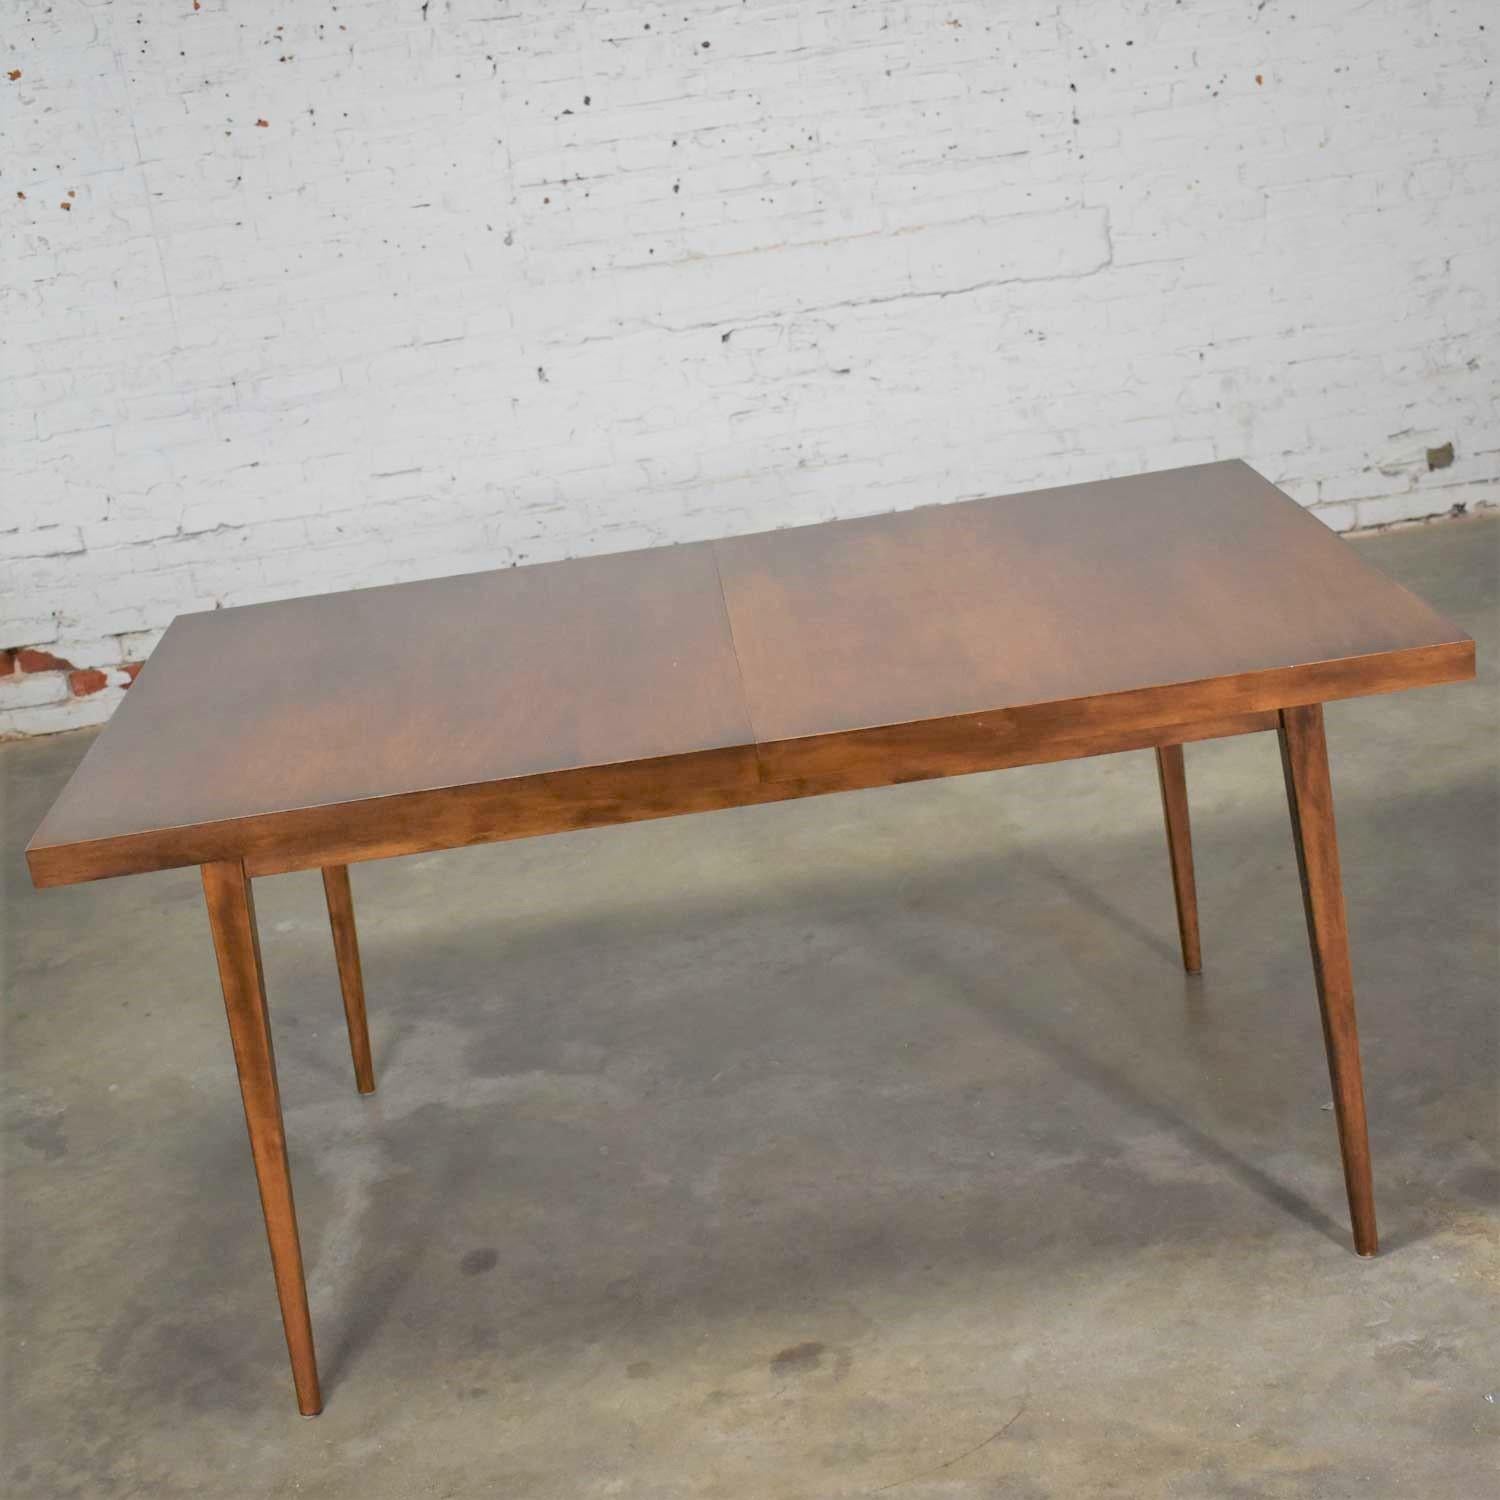 Handsome Mid-Century Modern extension dining table #1528 with two leaves for the Planer Group designed by Paul McCobb for Winchendon. It is in wonderful original vintage condition. That does not mean it is without age appropriate signs of wear;